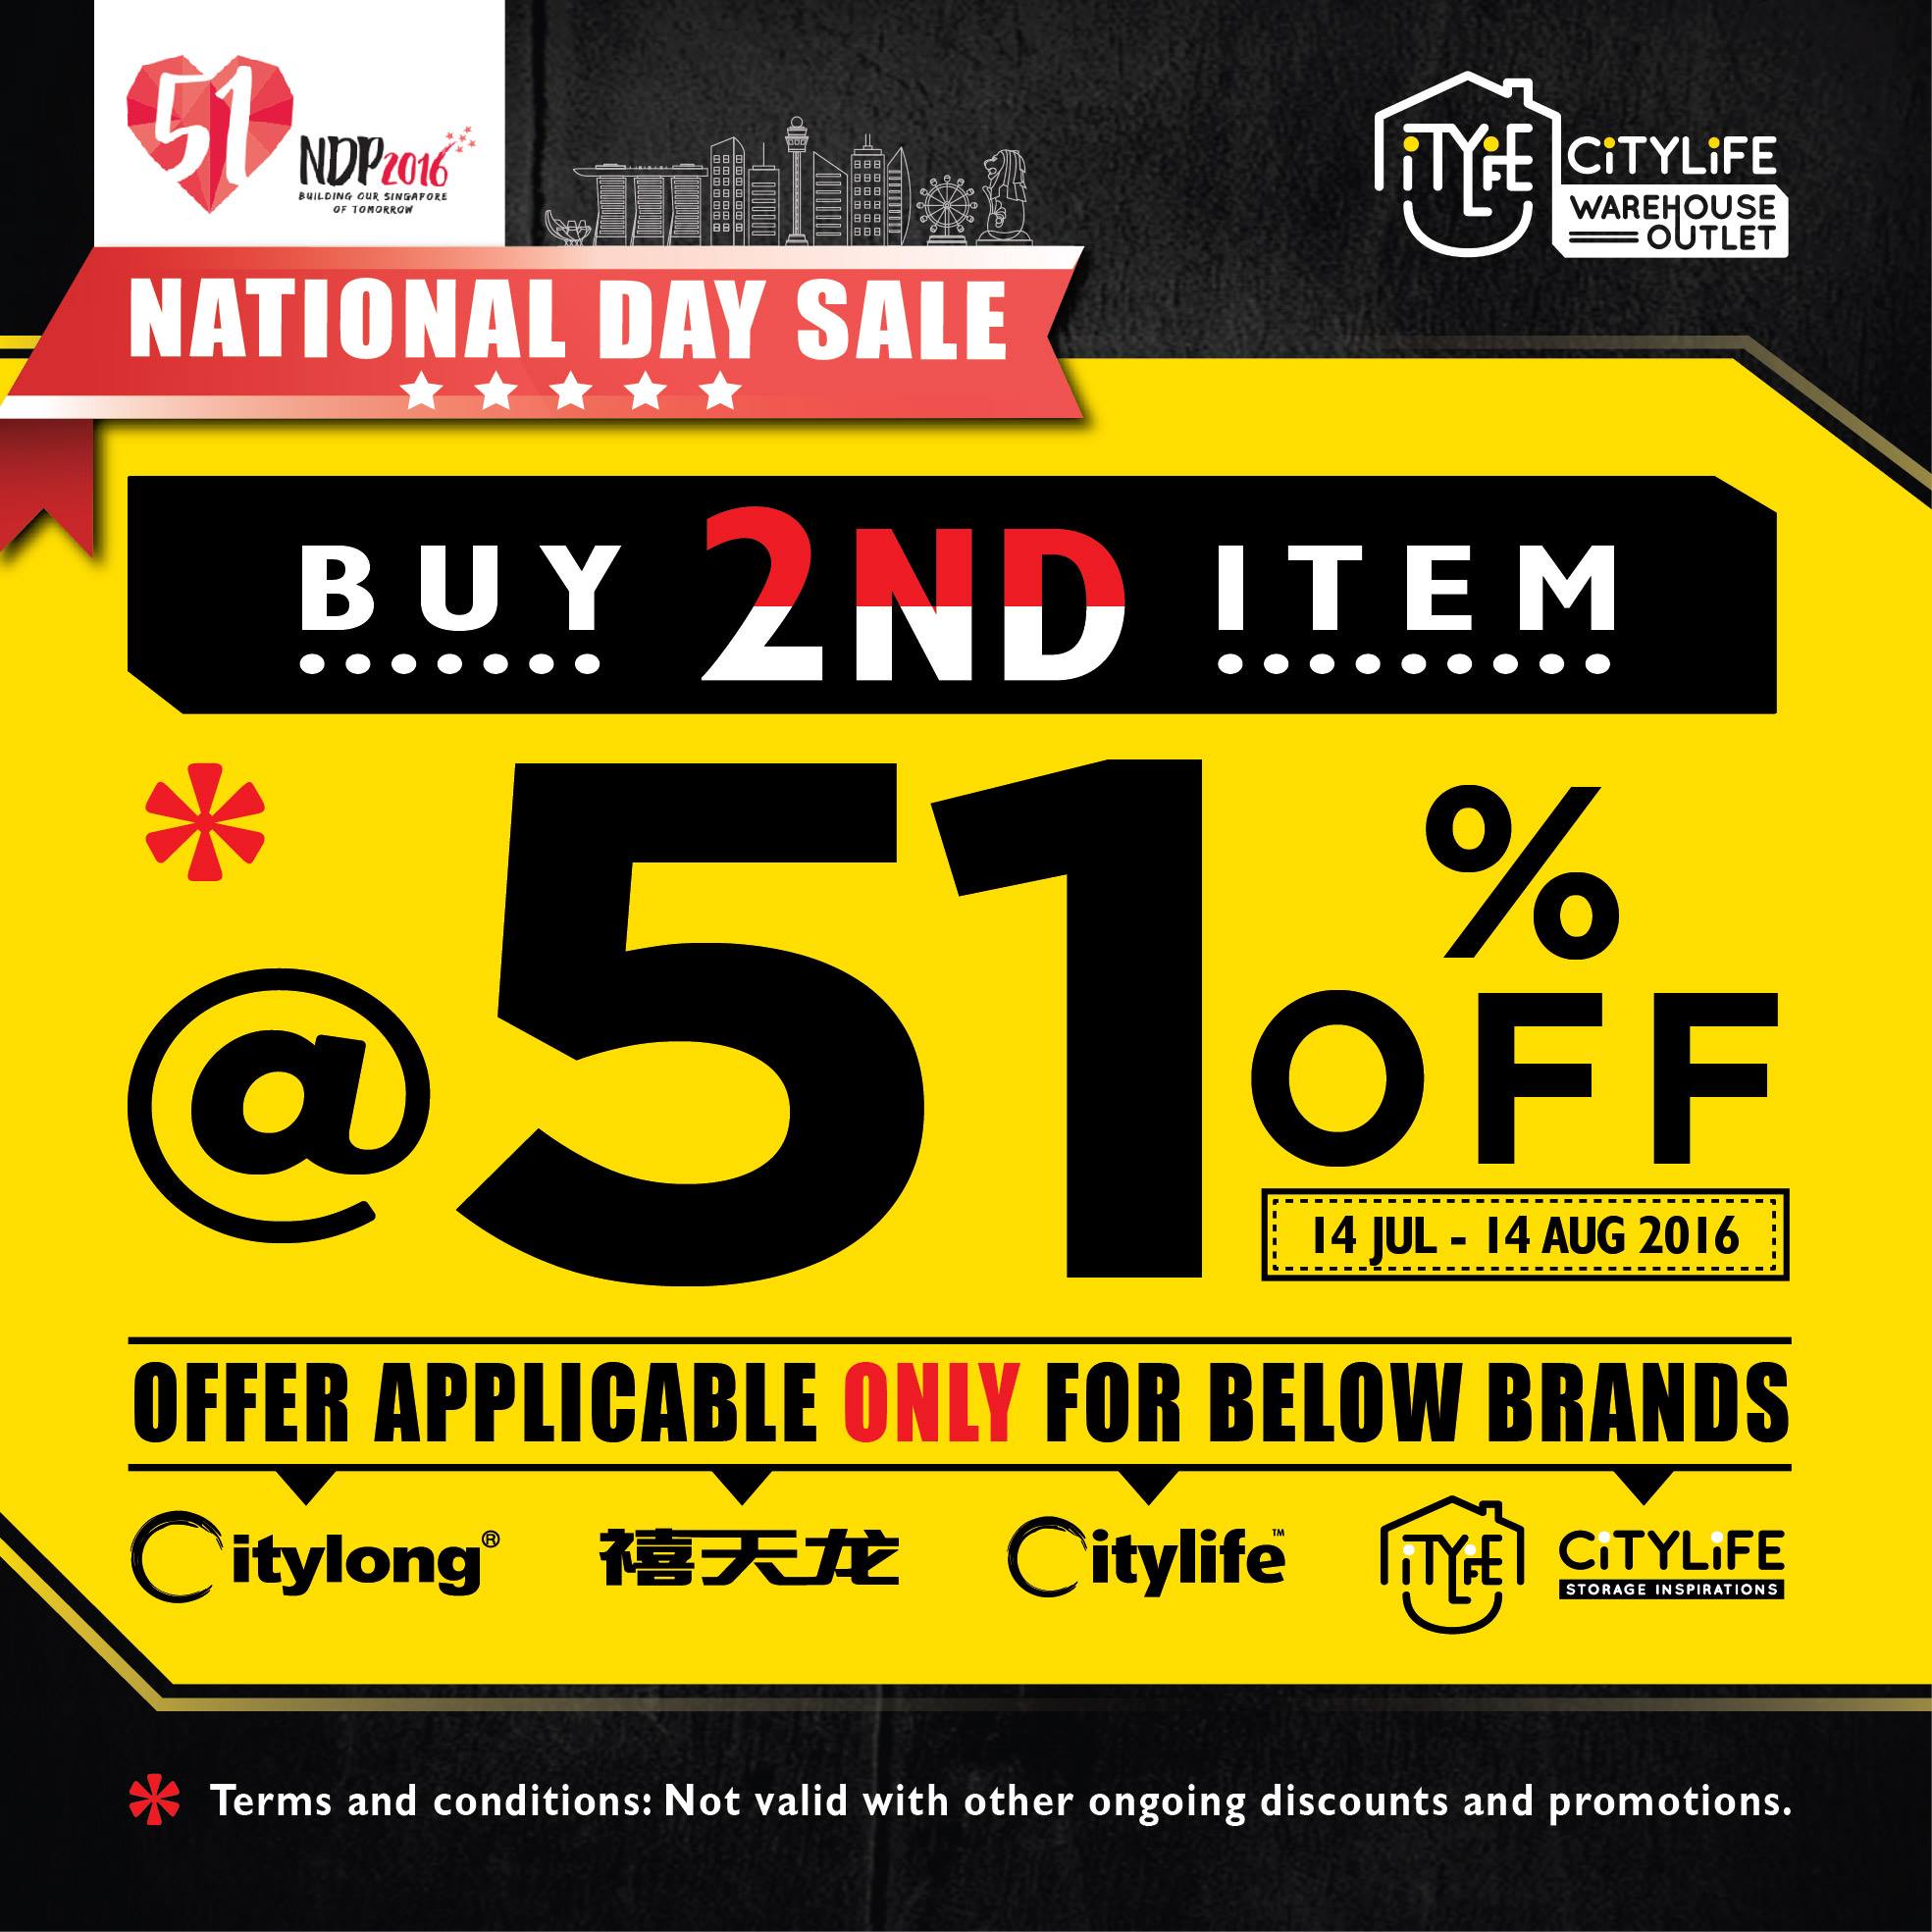 Citylife National Day Sale Singapore Promotion 14 Jul to 14 Aug 2016